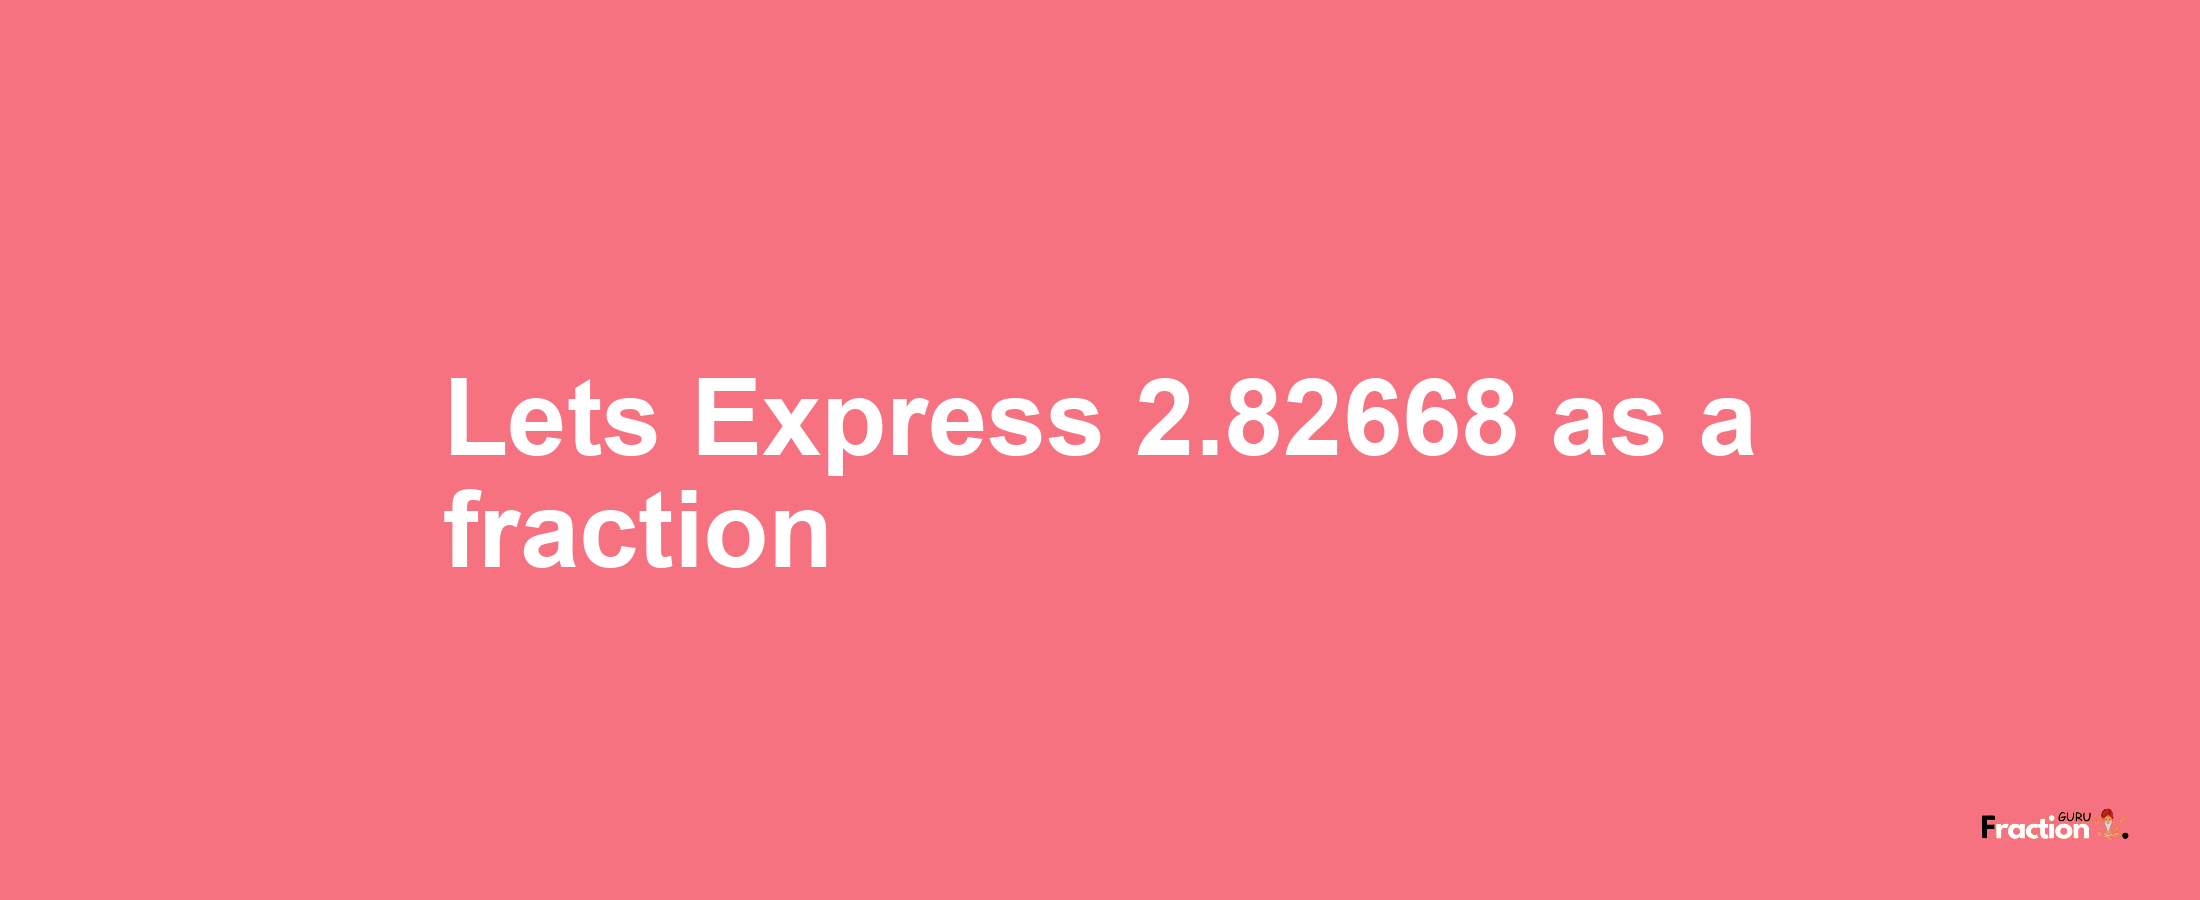 Lets Express 2.82668 as afraction